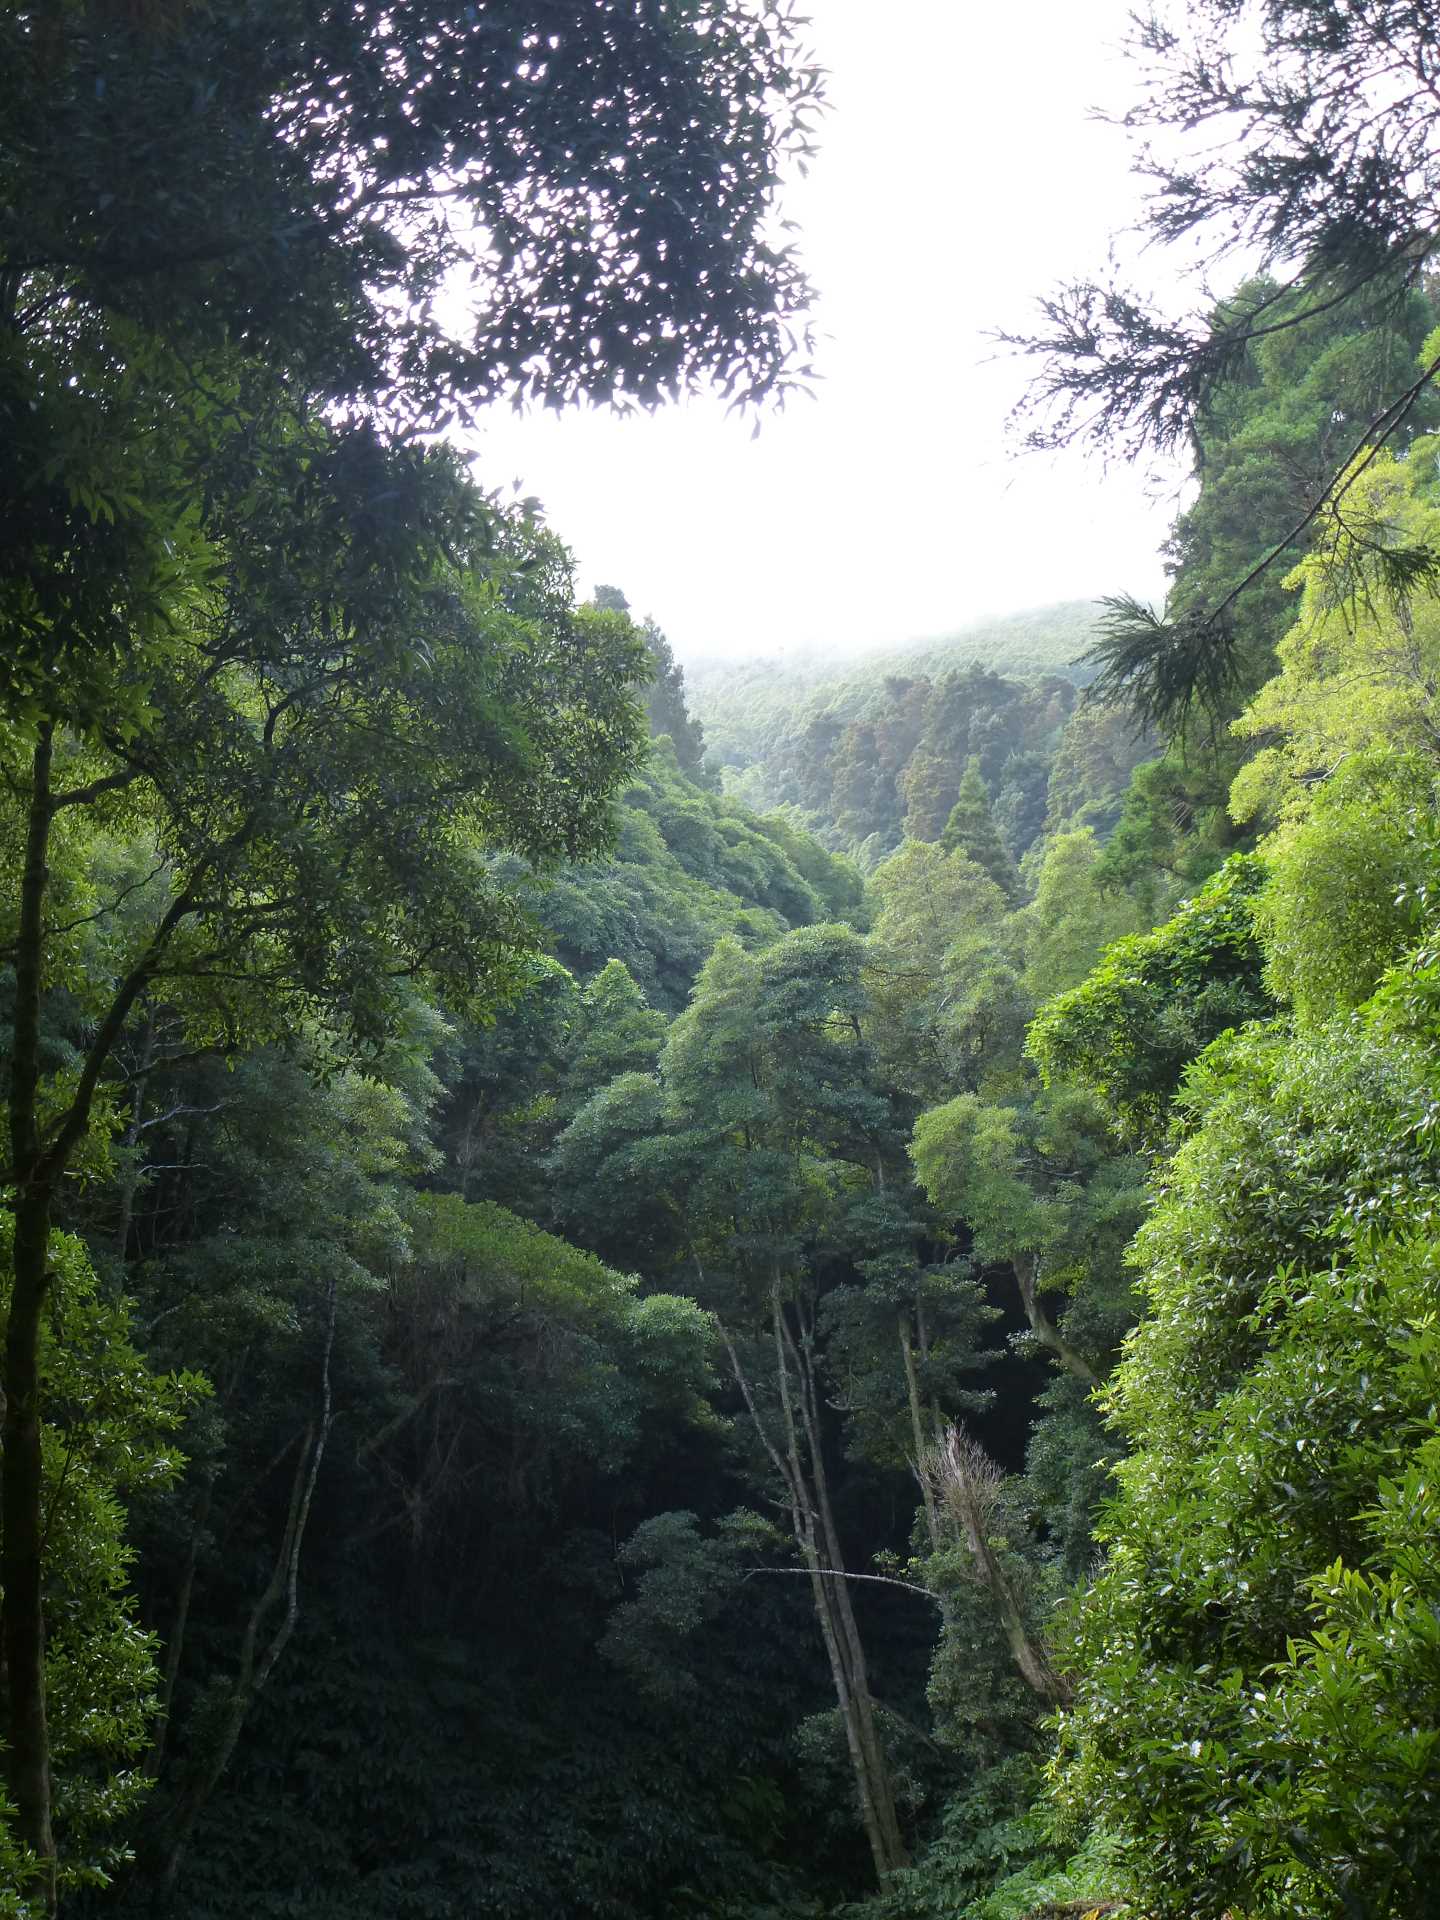 A view of a lush green valley of trees